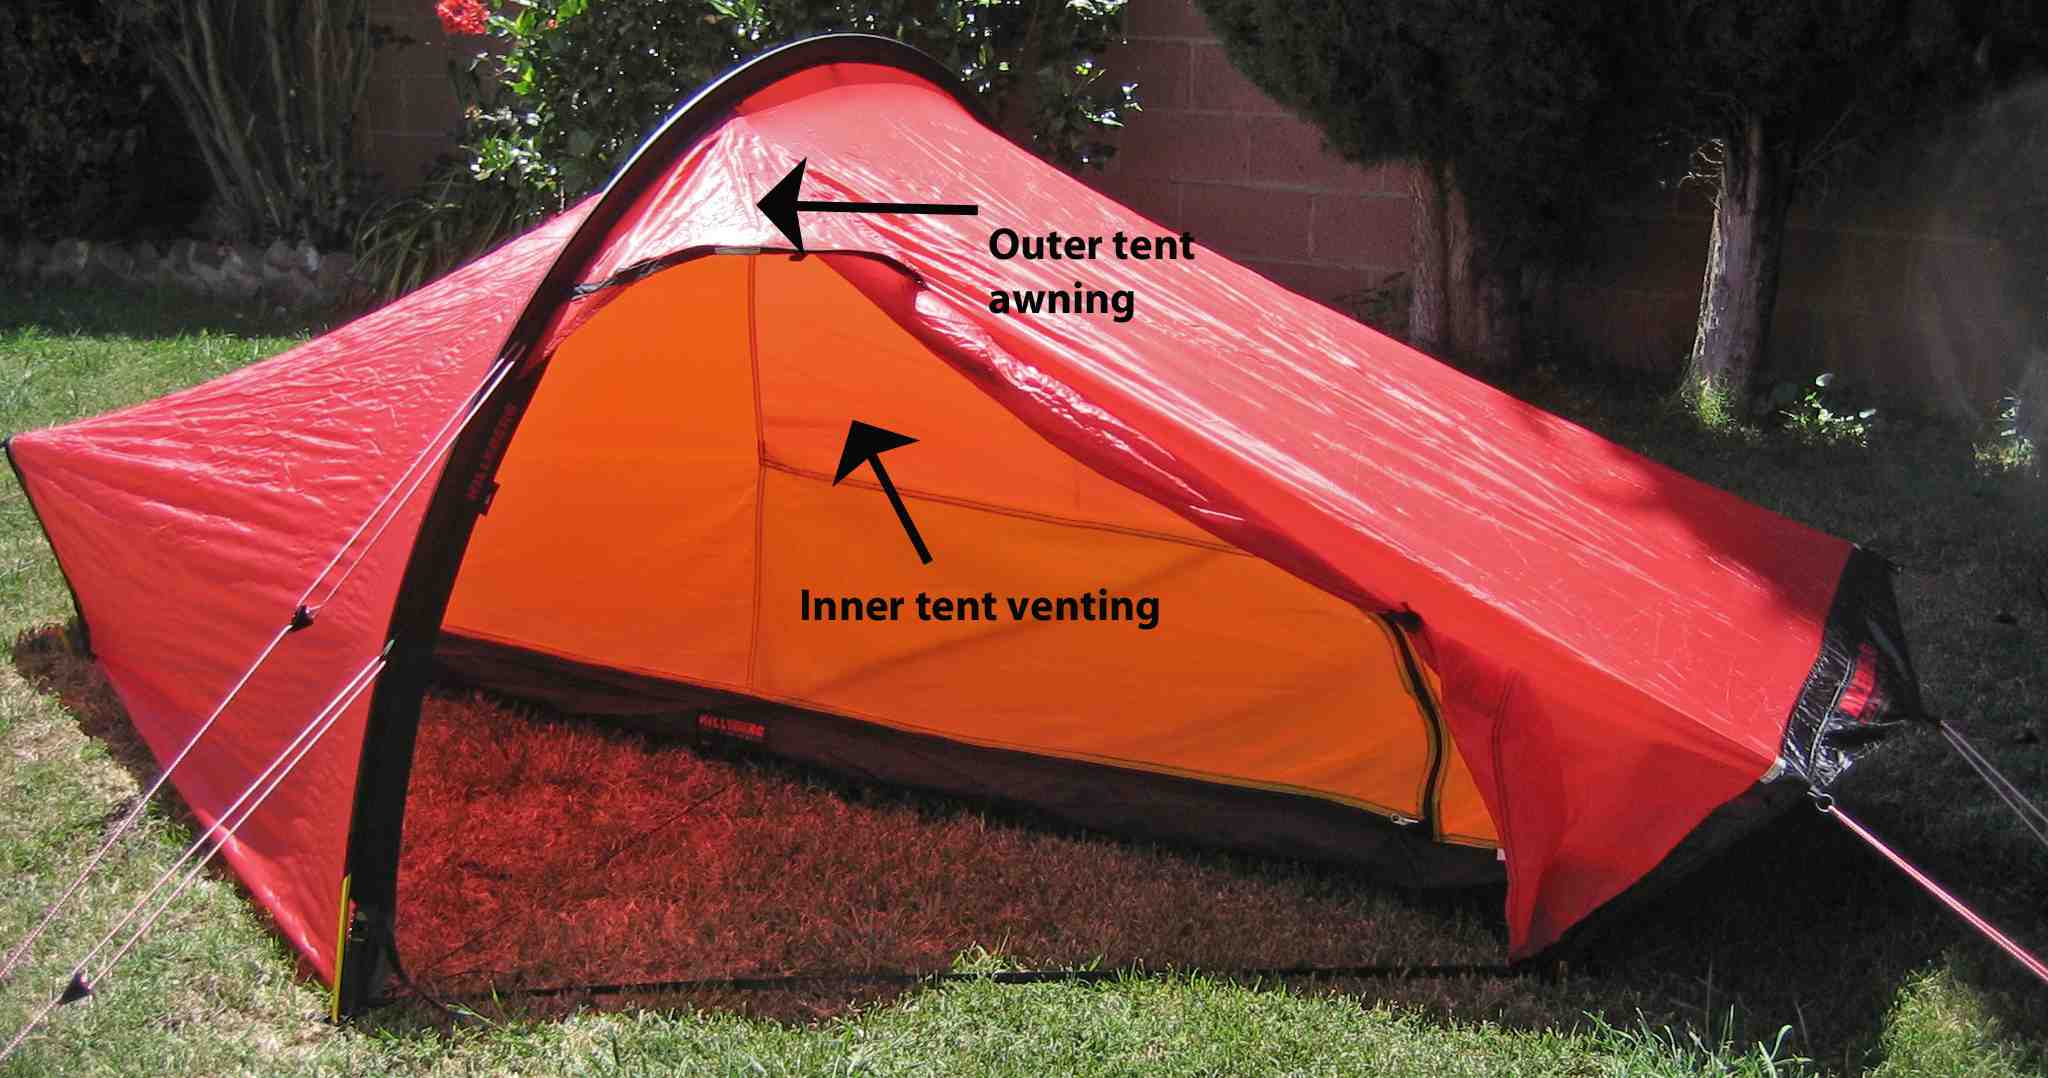 Awning and inner tent venting